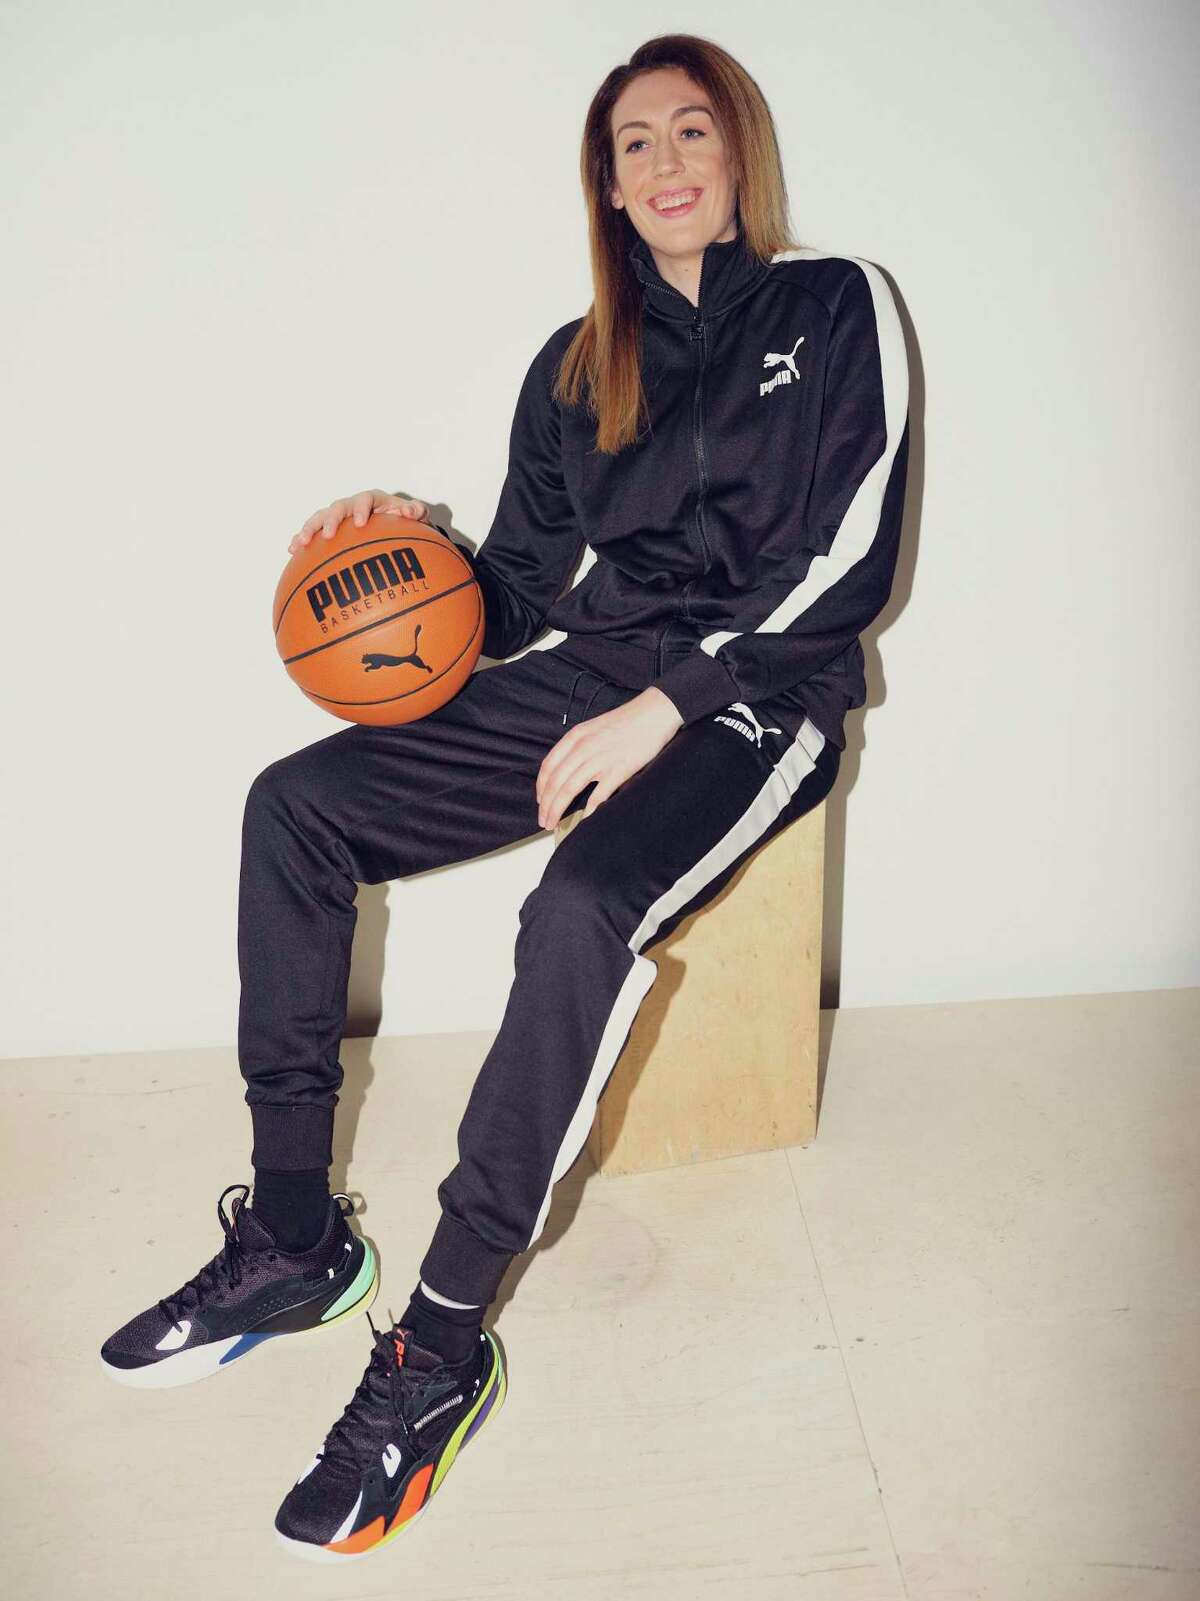 UConn legend and WNBA MVP Breanna Stewart signs with Puma, and she's